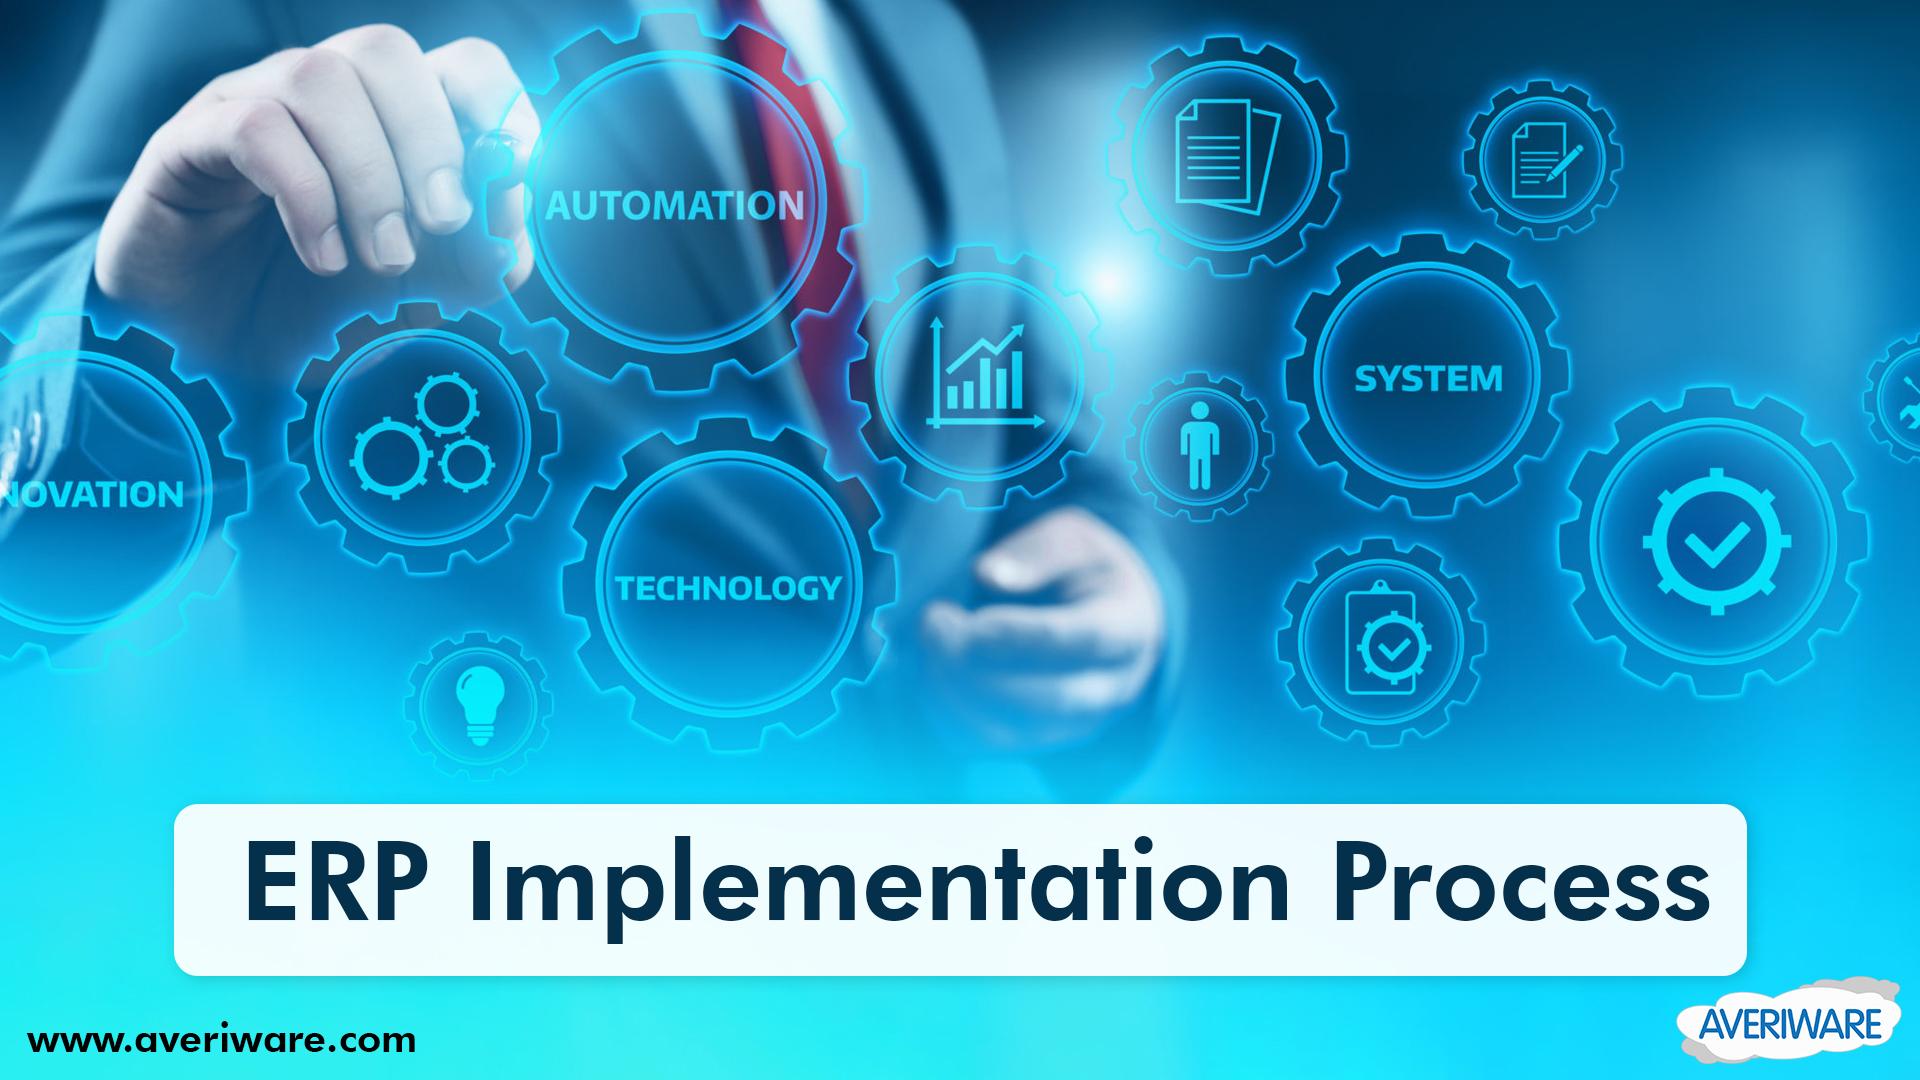 Steps for a Successful ERP System Implementation Process